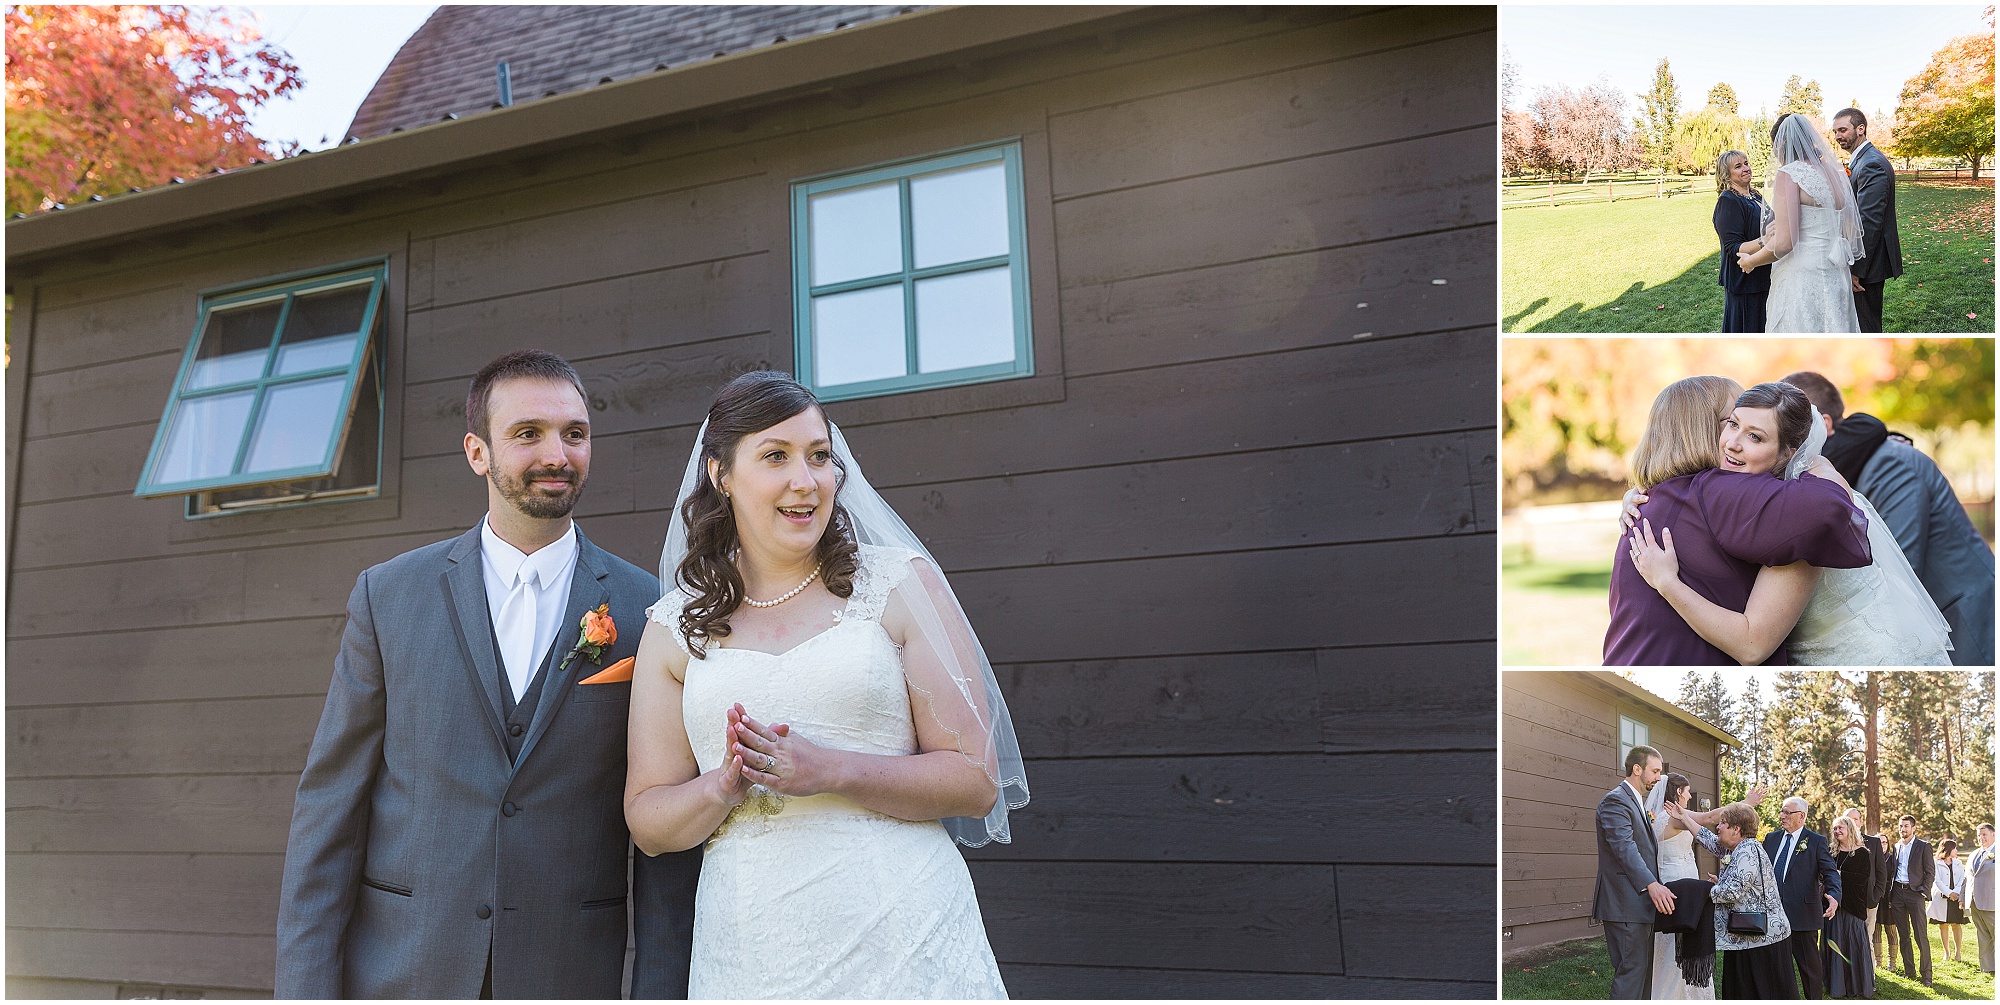 The couple has a traditional receiving line after their ceremony at Hollinshead Barn in Bend, OR. | Erica Swantek Photography